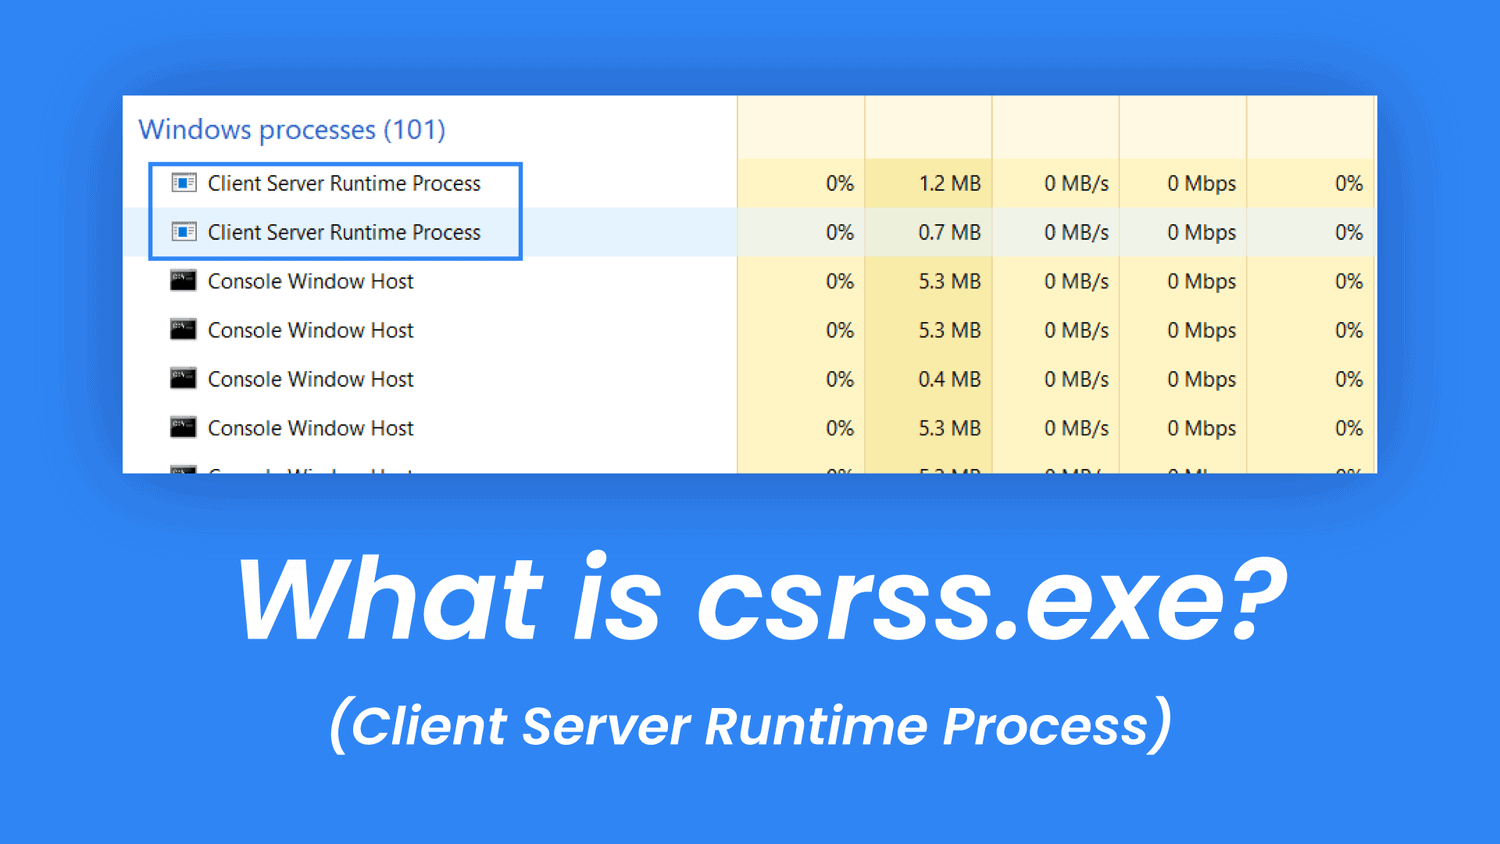 What is CSRSS.exe (Client Server Runtime Process) in Windows?